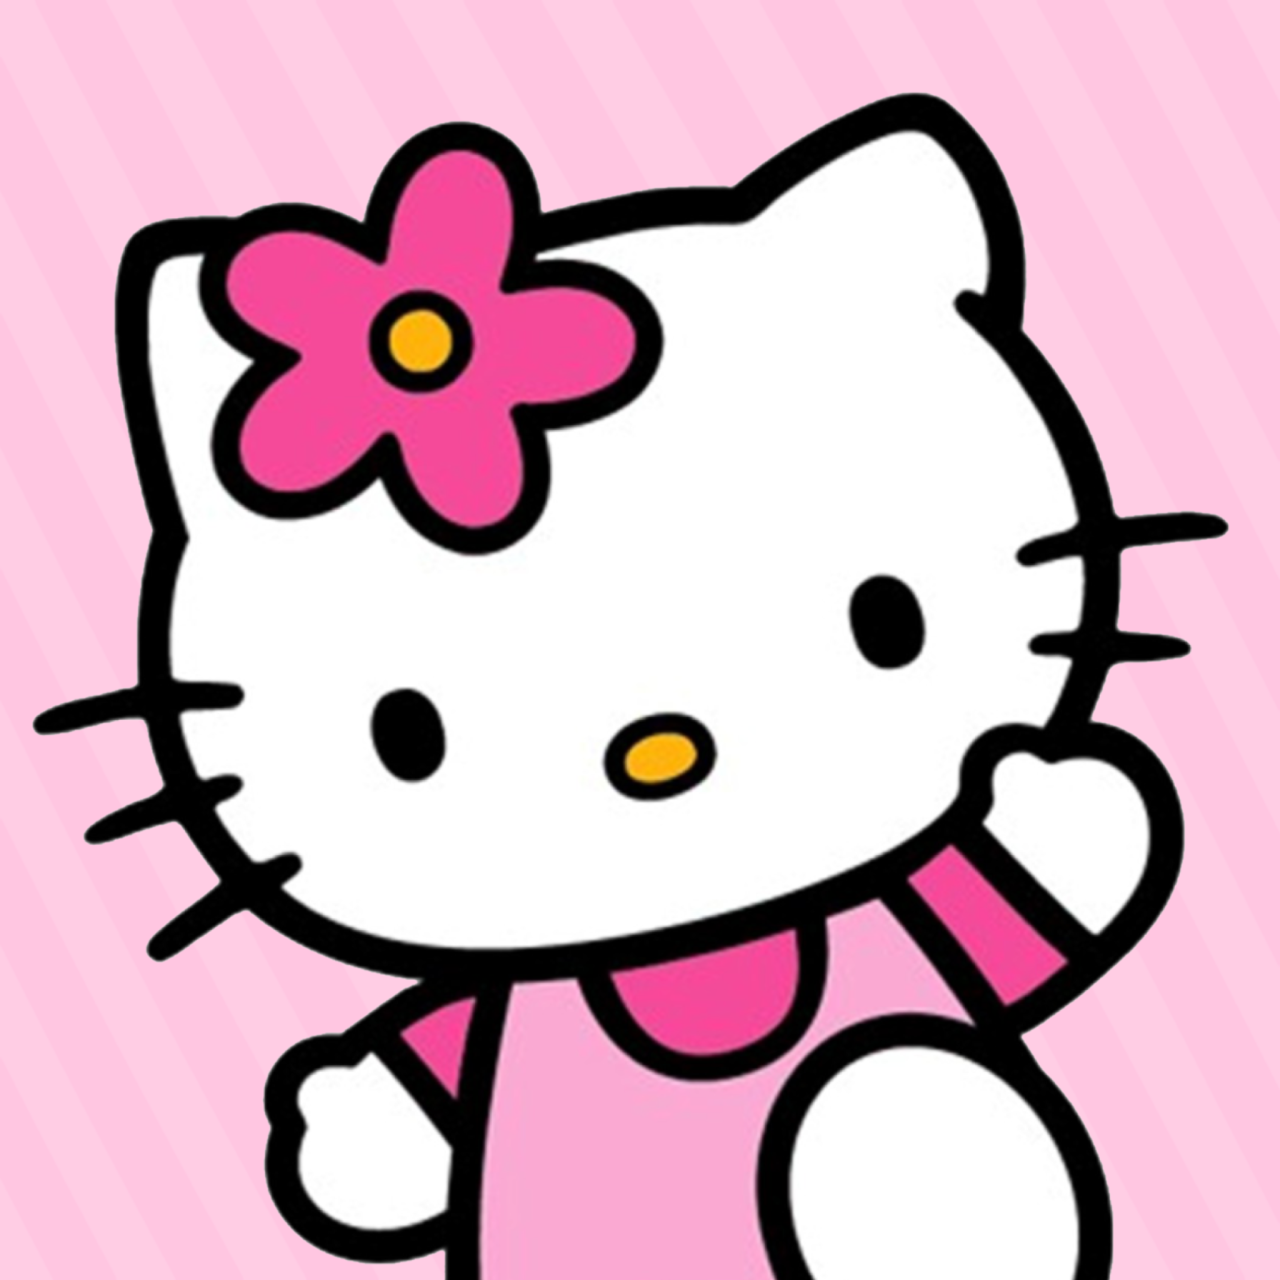 pink hello kitty icons for @d0llfaccee 💖